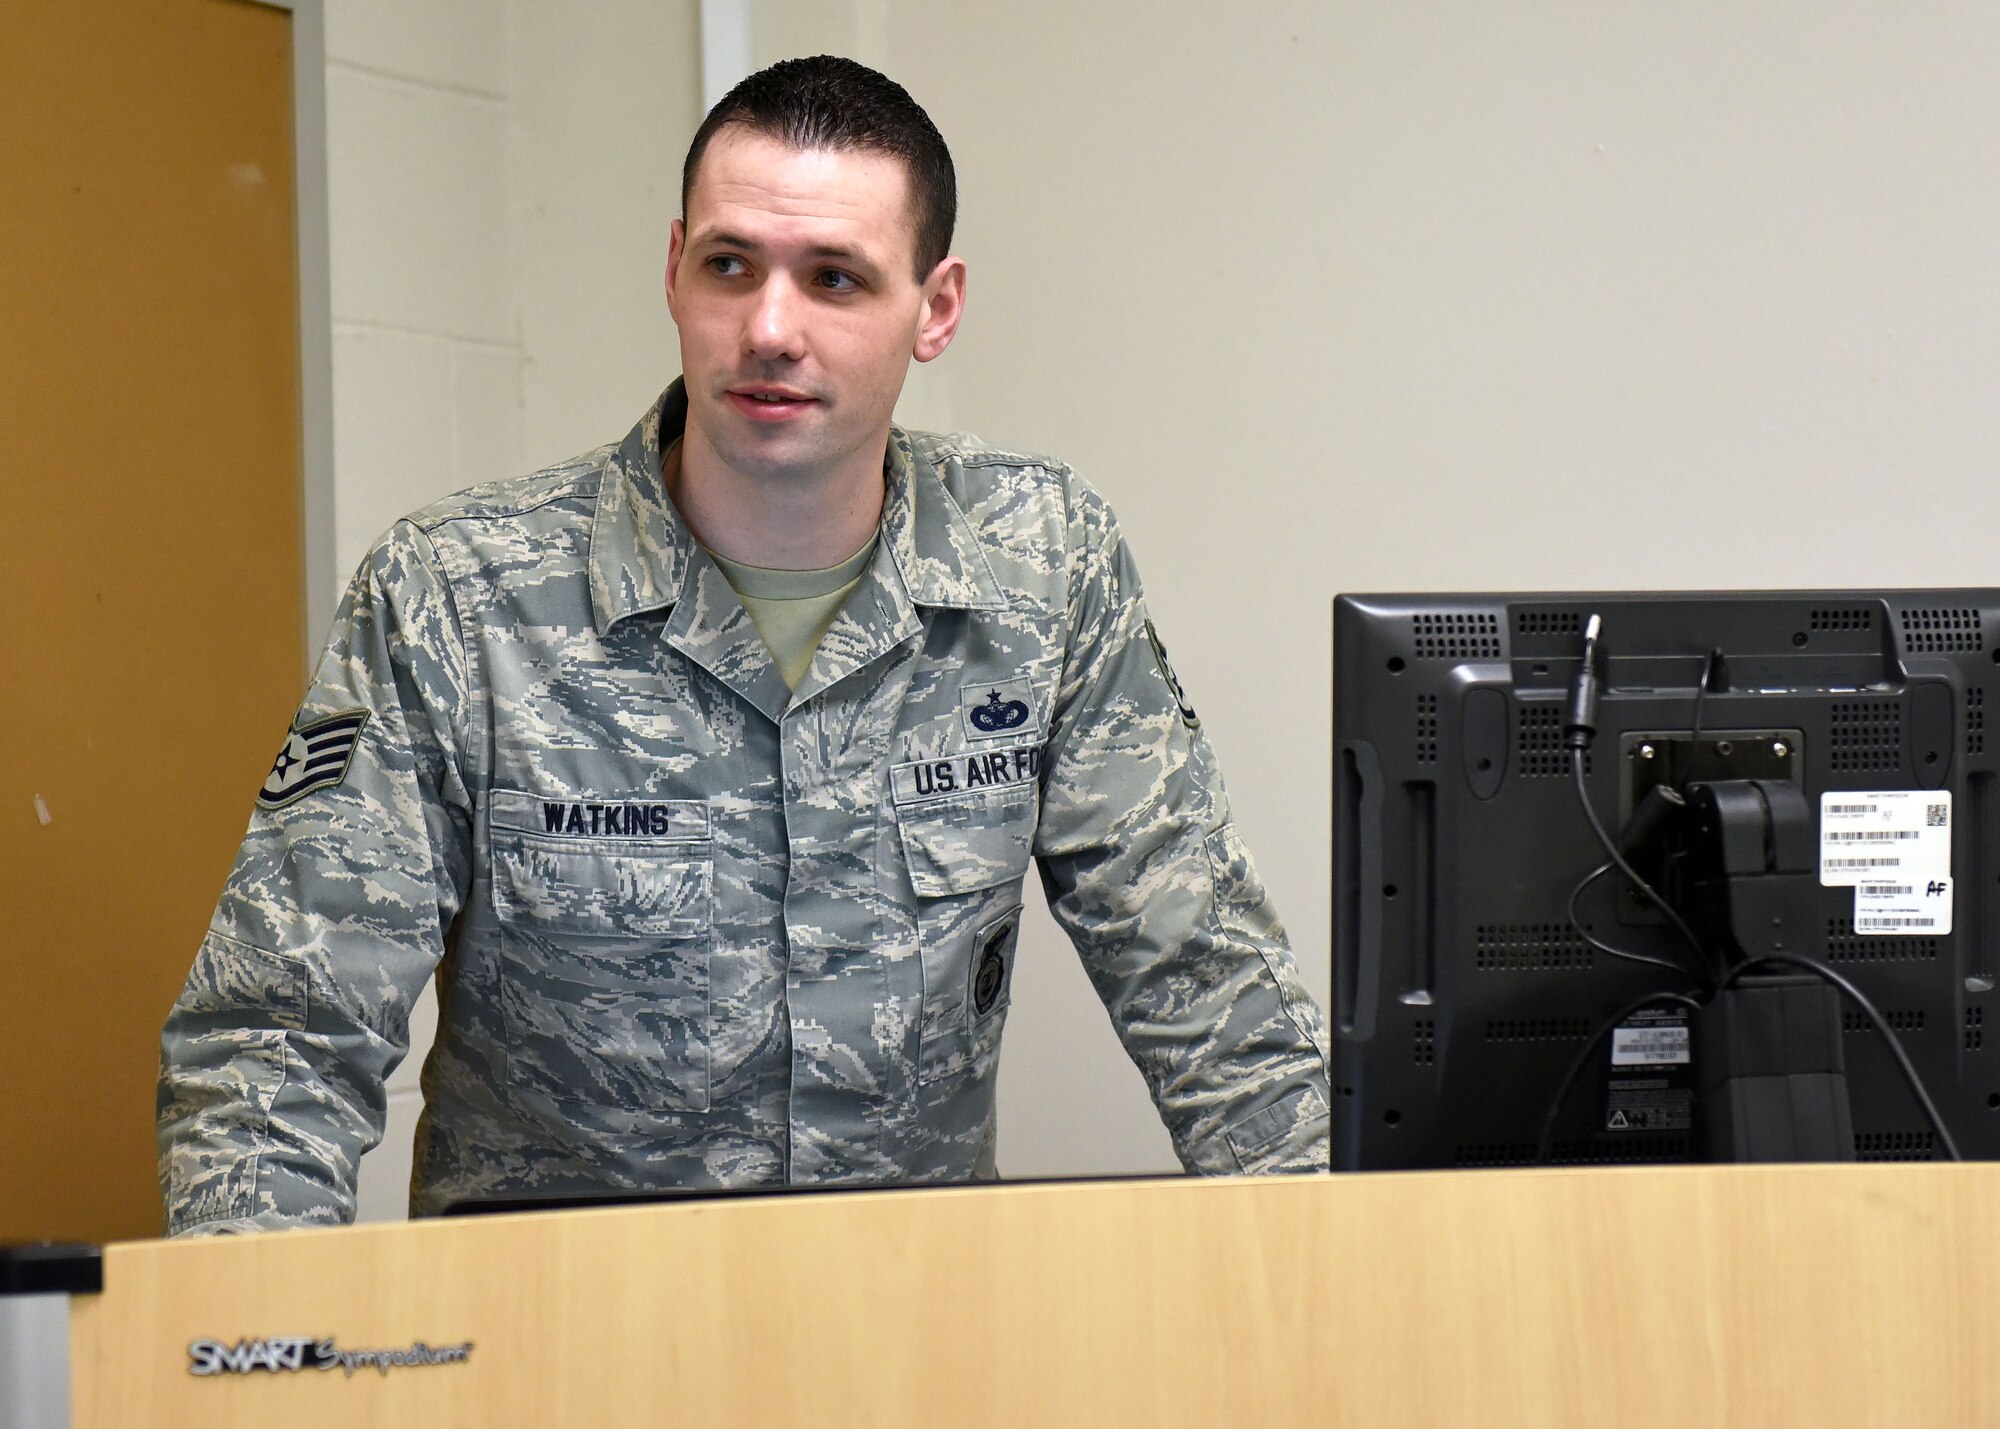 Staff Sgt. Daniel Watkins, 627th Security Forces Squadron unit training manager, stands at a podium while teaching an Expeditionary Active Shooter class at the 627th SFS, Jan. 18, 2018 at Joint Base Lewis-McChord, Wash. Watkins was recognized for outstanding Airmanship after escorting an ill, elderly veteran to an out-of-state Veterans Affairs appointment of his own volition, and ensuring the gentleman’s continued care. (U.S. Air Force photo by Staff Sgt. Whitney Taylor)